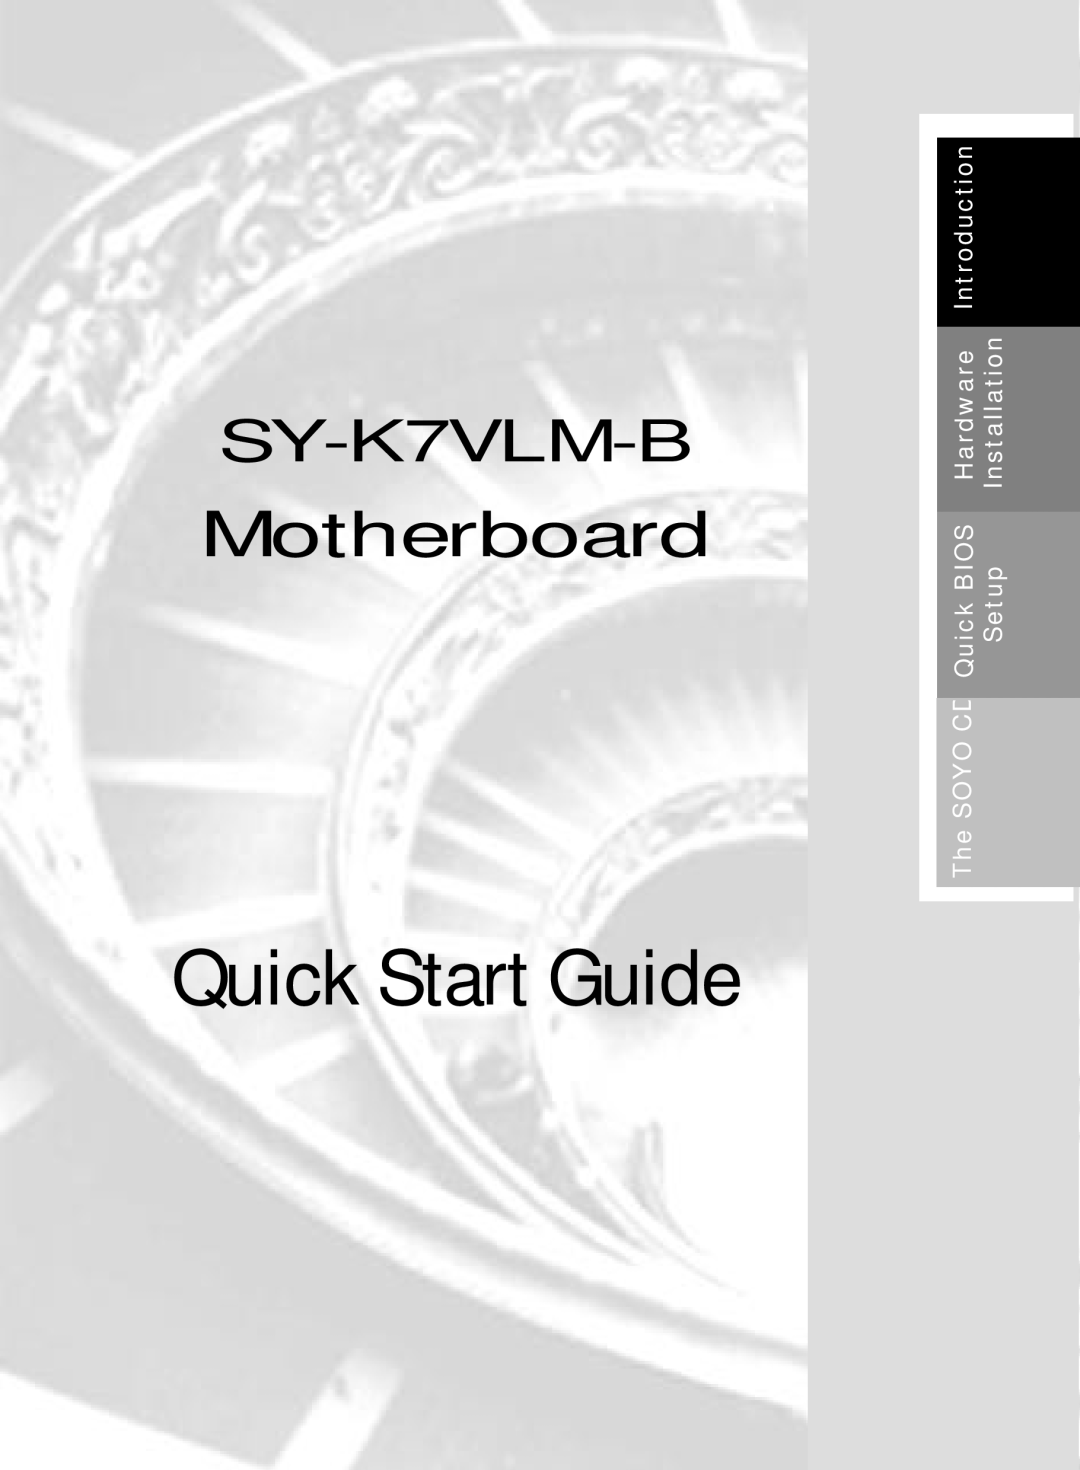 SOYO SY-K7VLM-B quick start Introduction, Hardware, Installation, Quick BIOS, Setup, The SOYO CD, Quick Start Guide 